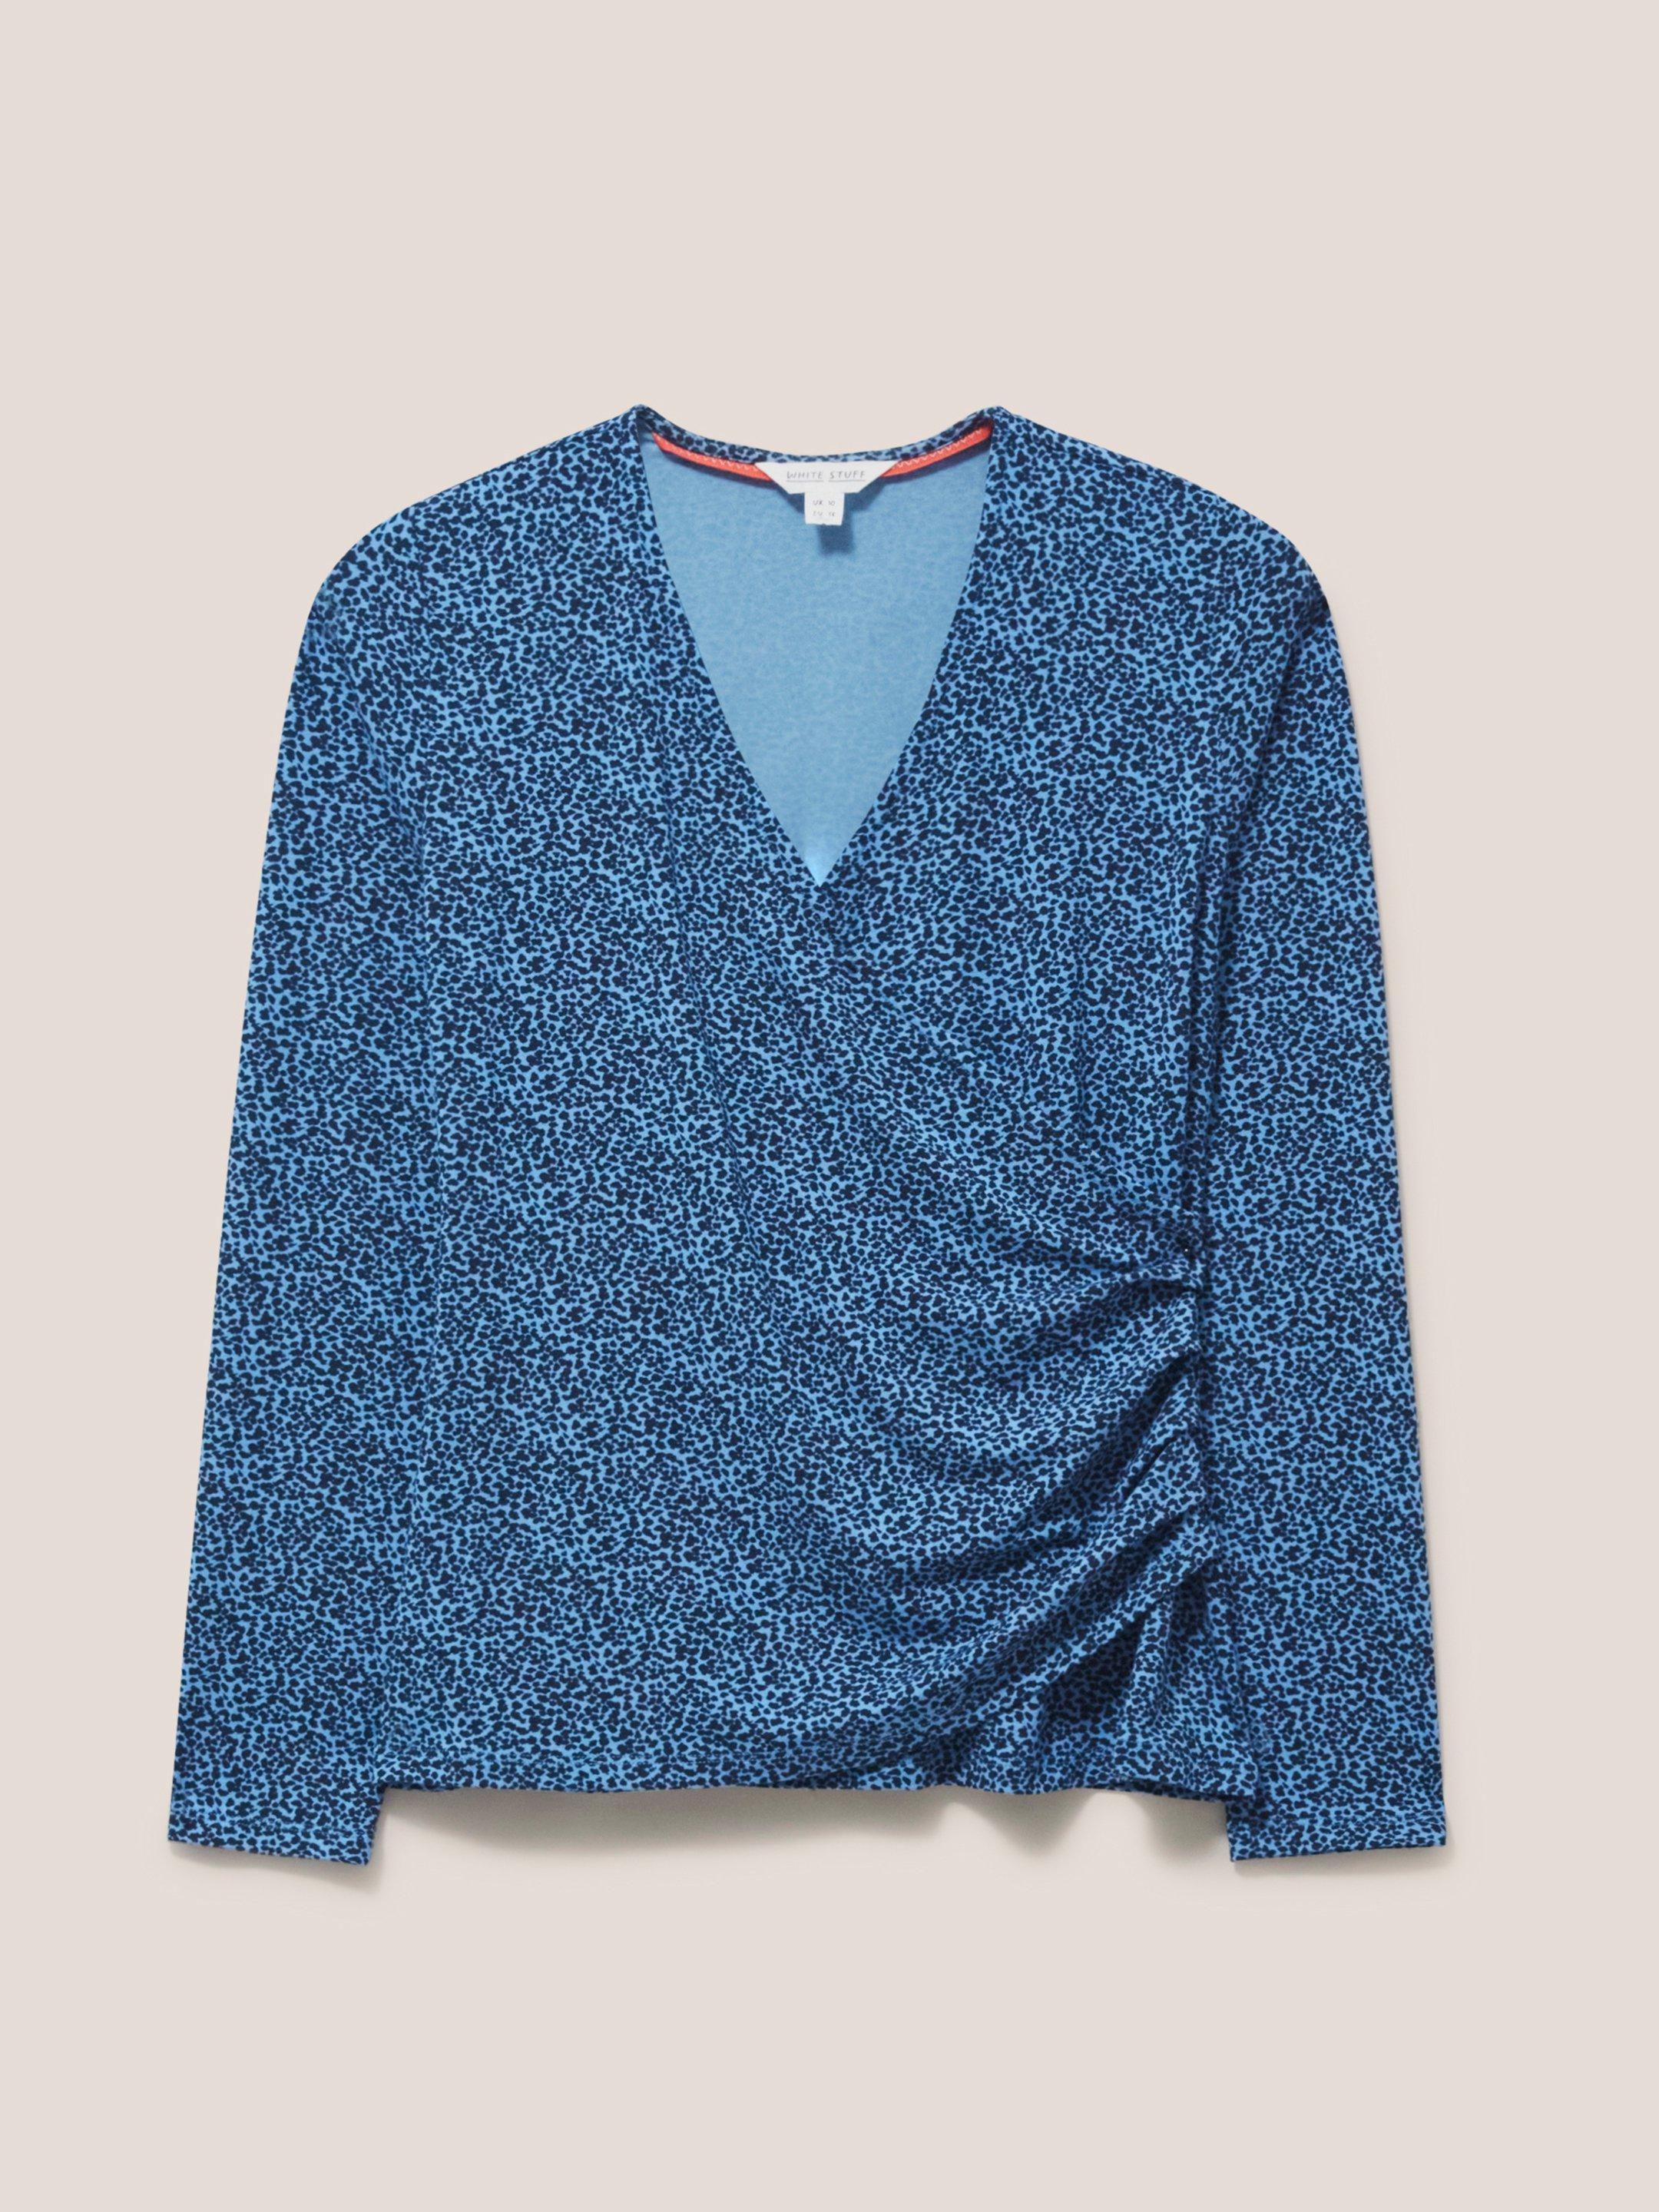 Wrap Top in BLUE MLT - FLAT FRONT